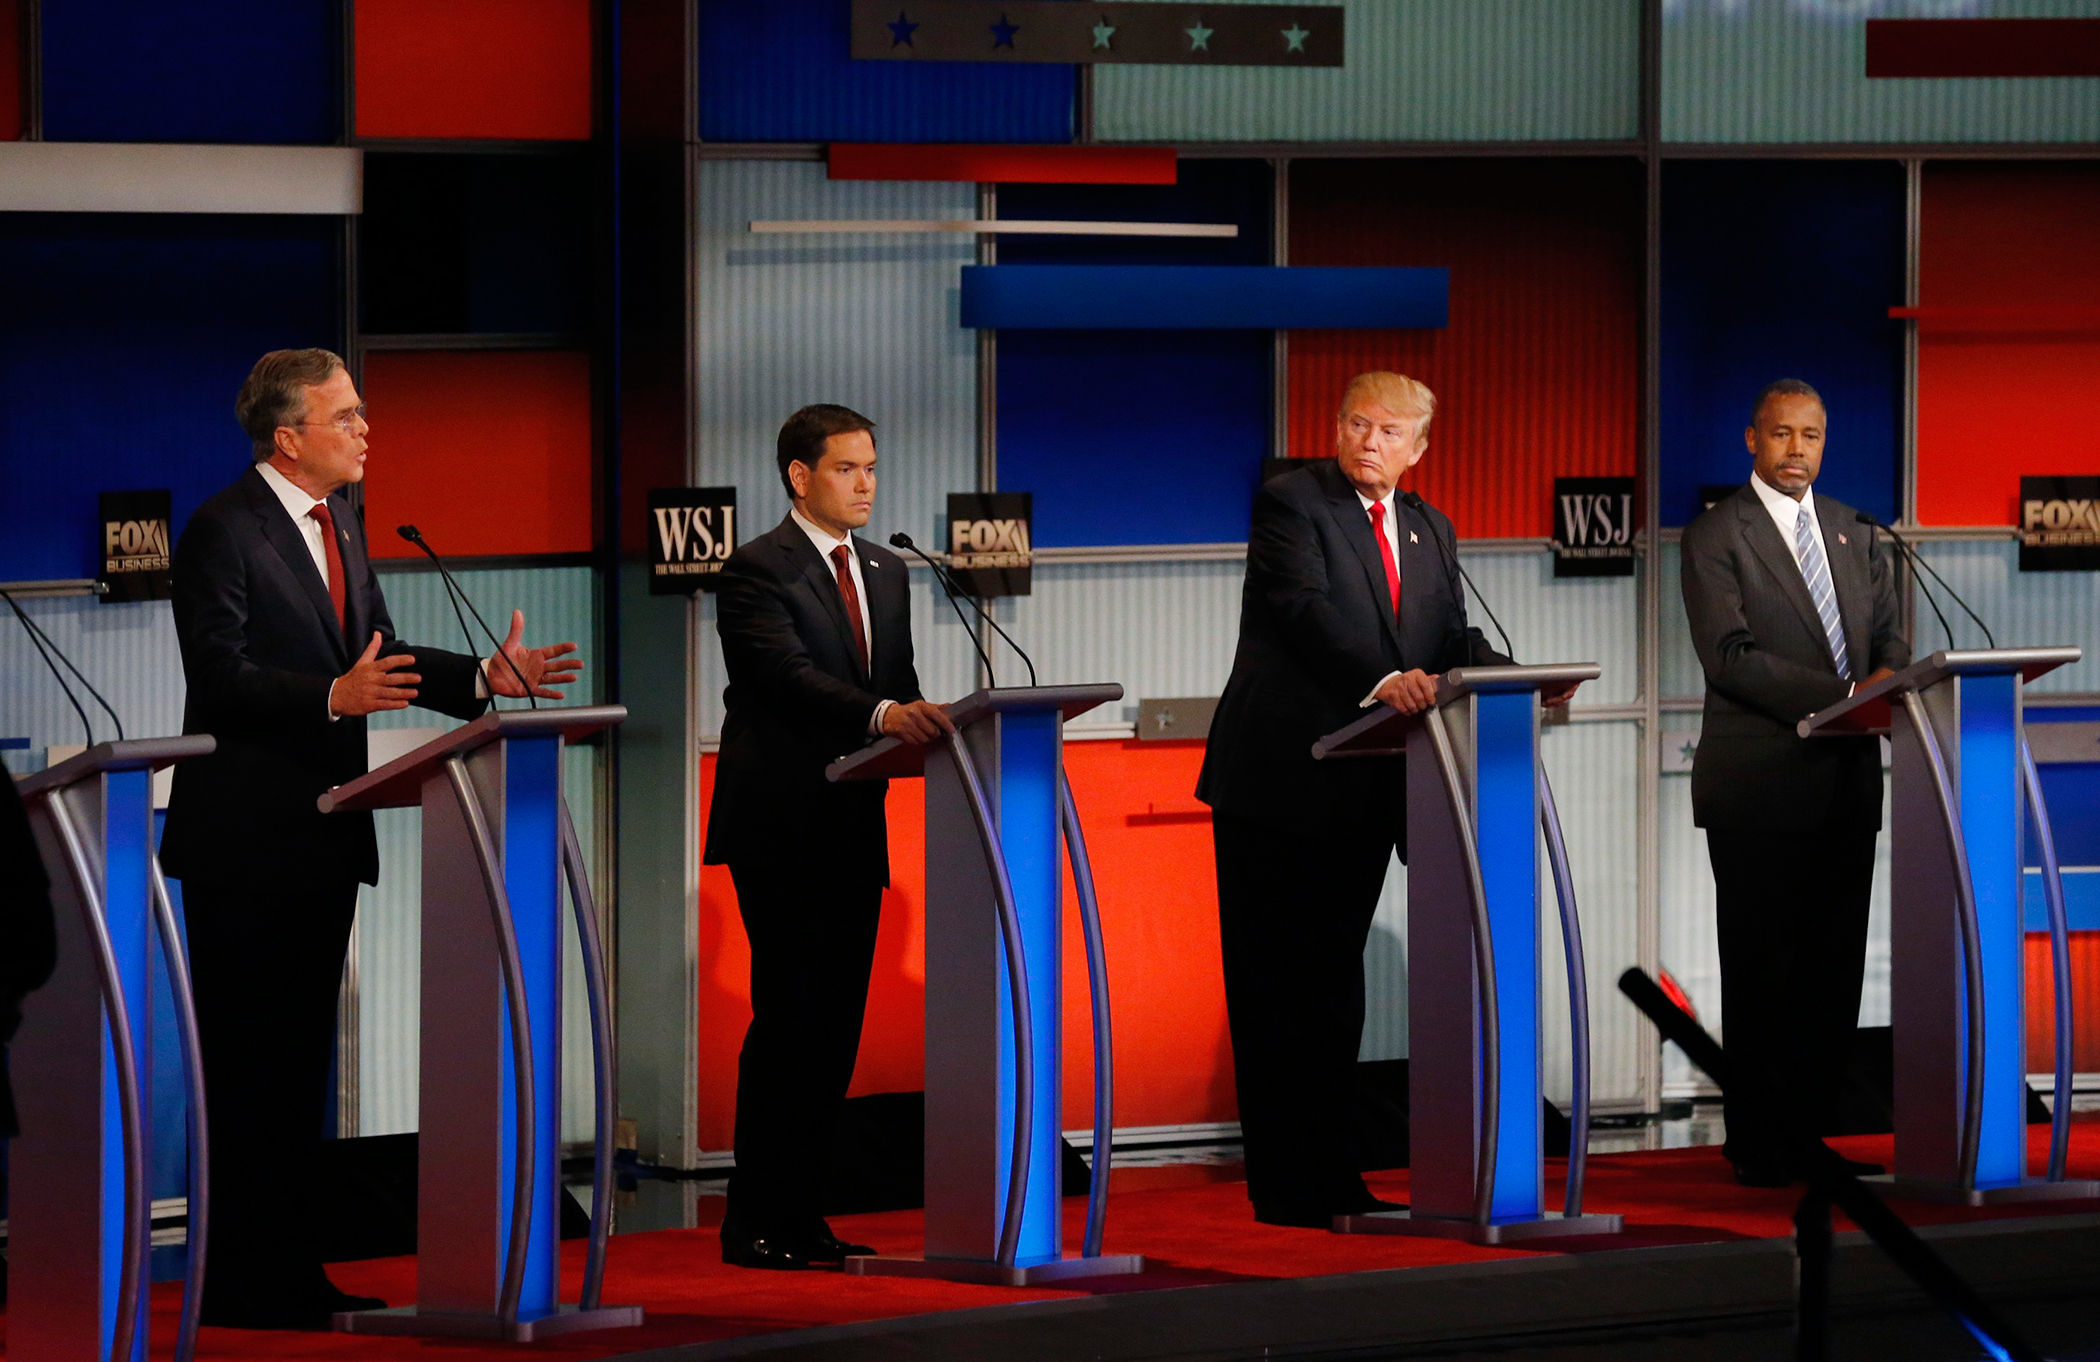 Republican U.S. presidential candidate and former Governor Jeb Bush (L) speaks as U.S. Senator Marco Rubio (2nd L), businessman Donald Trump and Dr. Ben Carson (R) listen during the debate held by Fox Business Network for the top 2016 U.S. Republican presidential candidates in Milwaukee, Wisconsin, November 10, 2015. (Jim Young&mdash;Reuters)